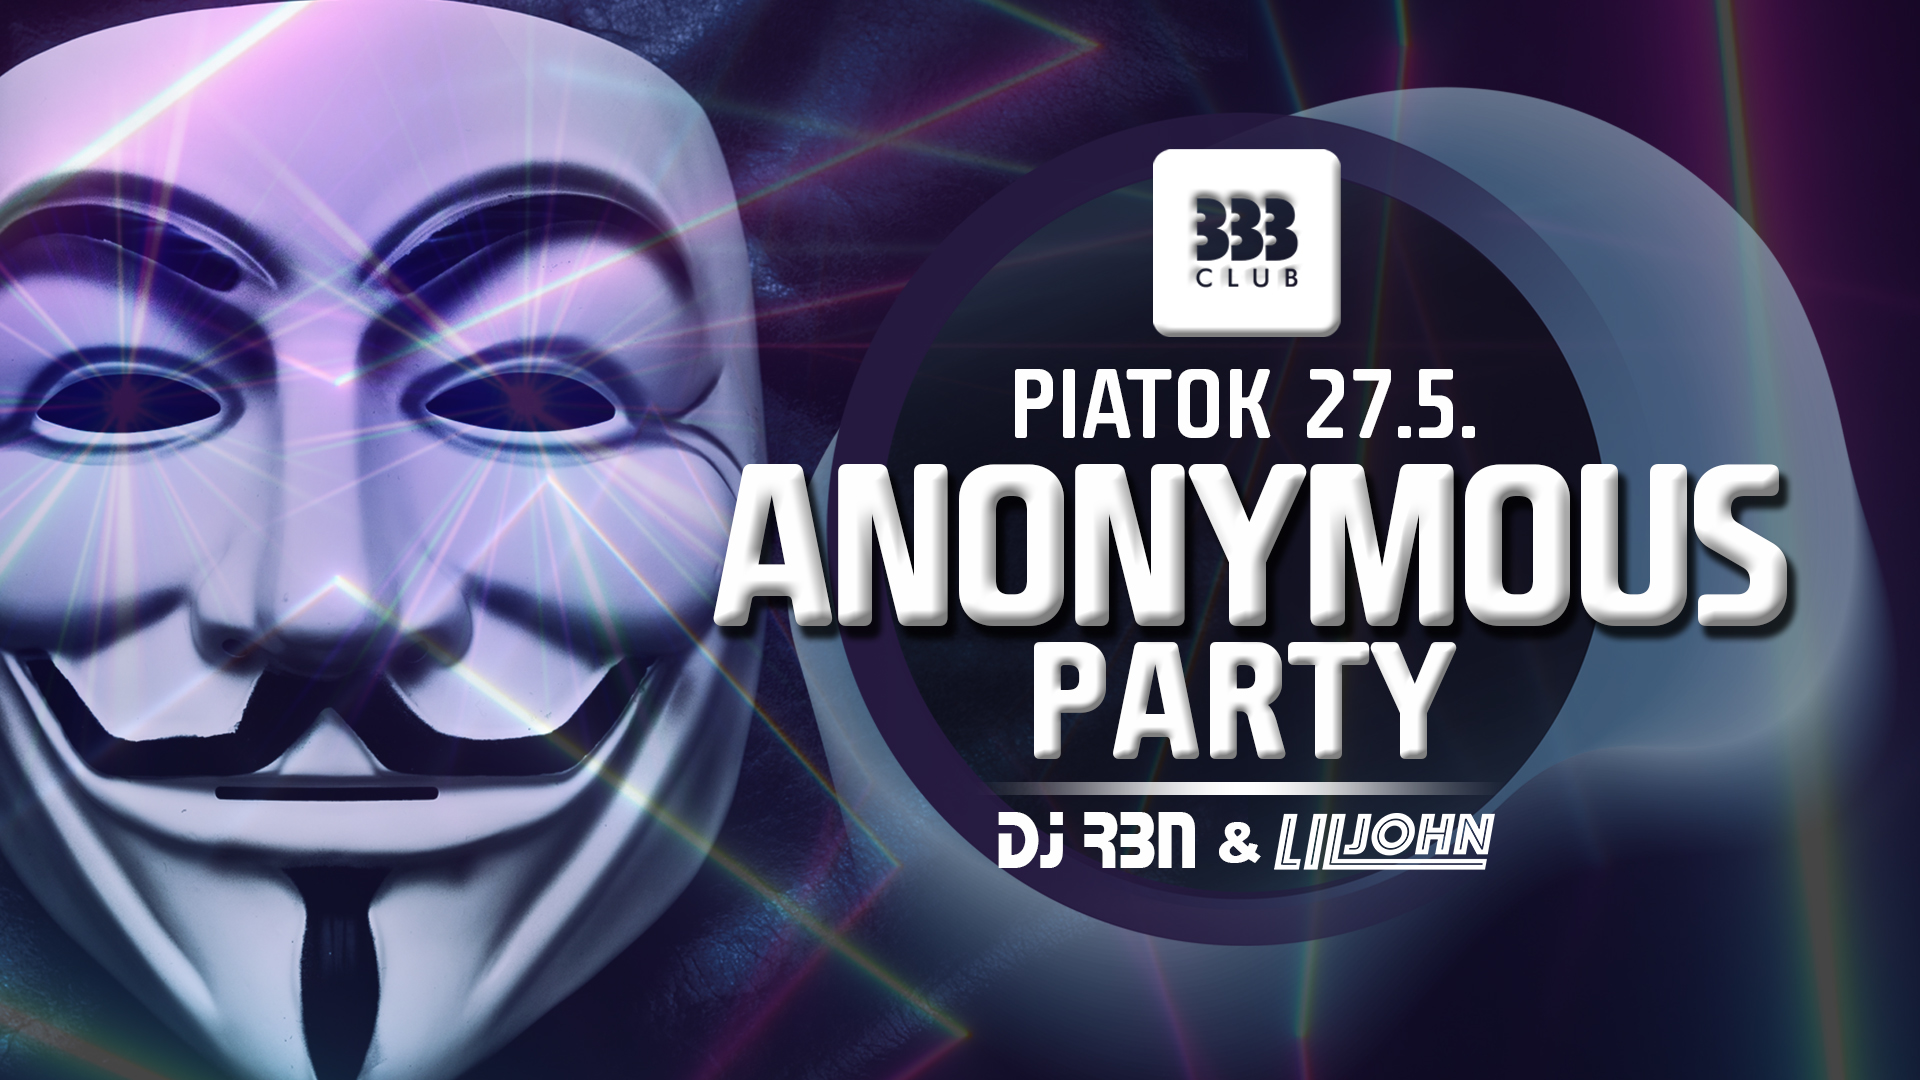 ★ ANONYMOUS Party ★ 27.5.